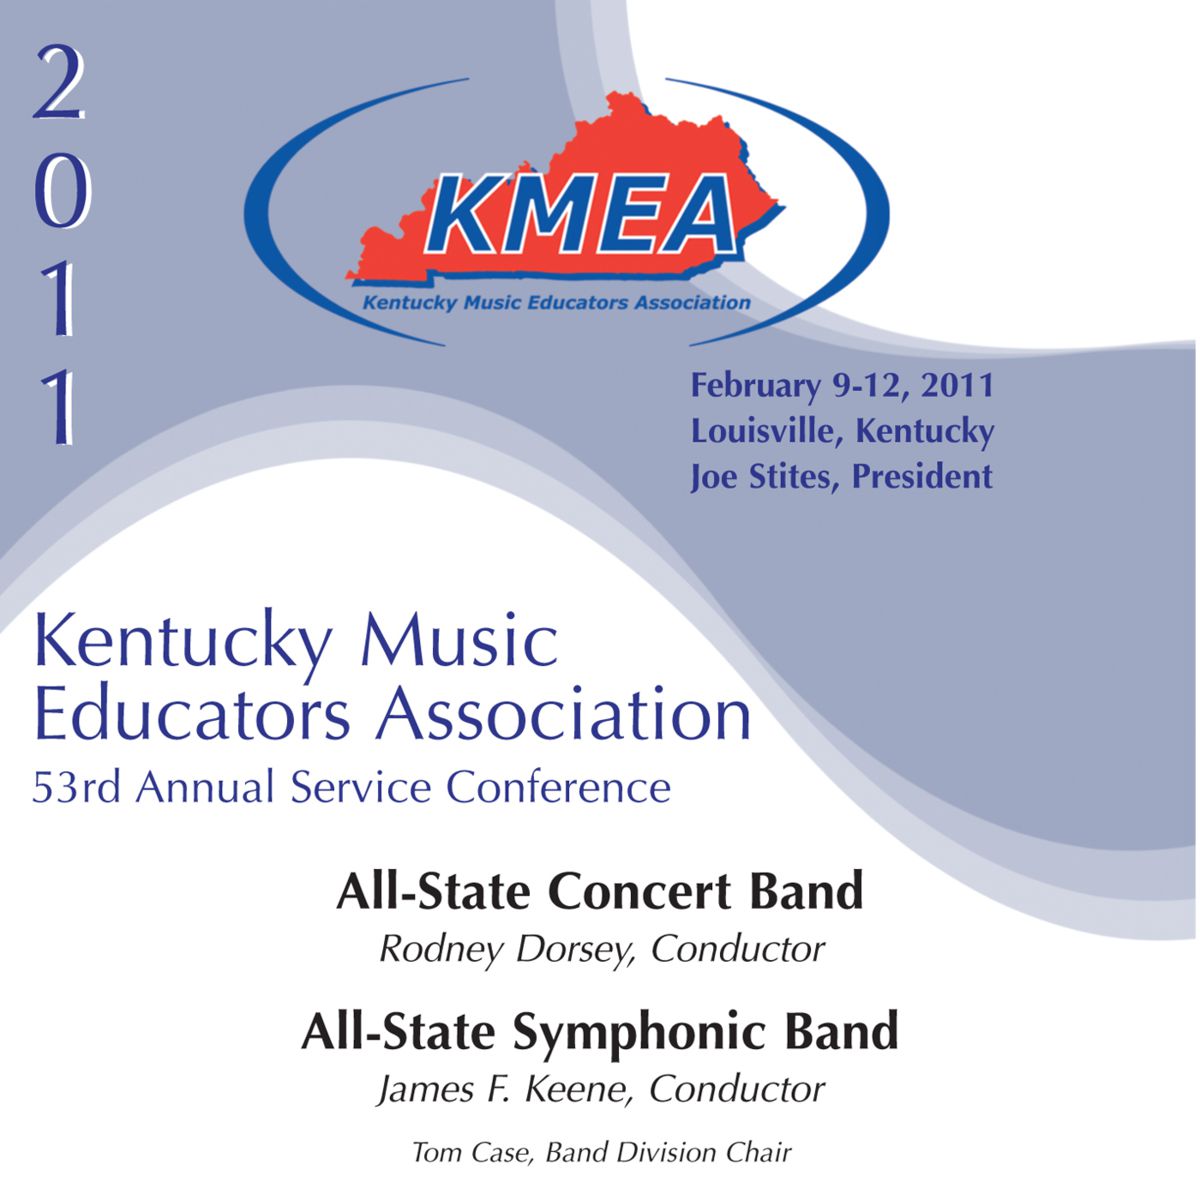 2011 Kentucky Music Educators Association: All-State Concert Band and All-State Symphonic Band - hacer clic aqu